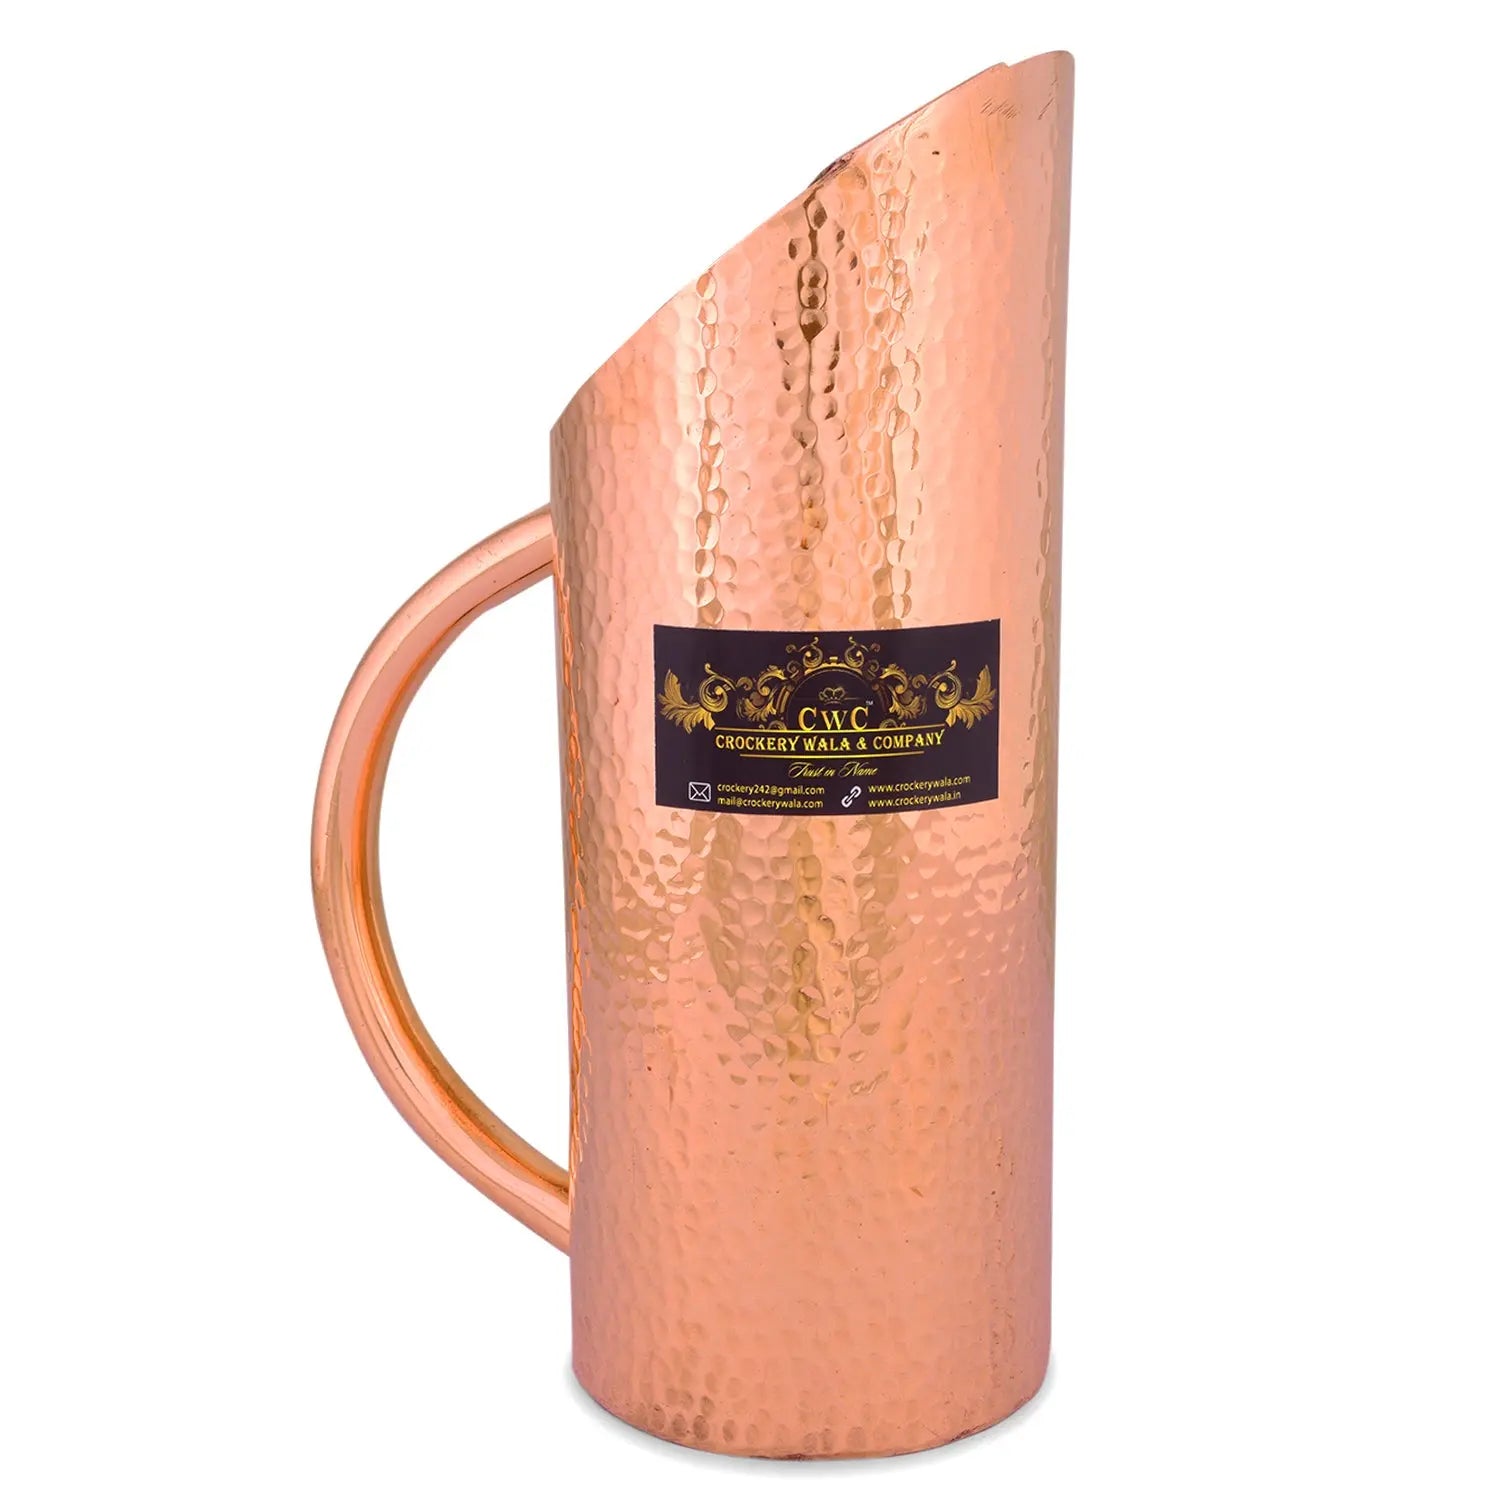 Pure Copper Hammered Jug For Serving In Hotels & Restaurants - CROCKERY WALA AND COMPANY 